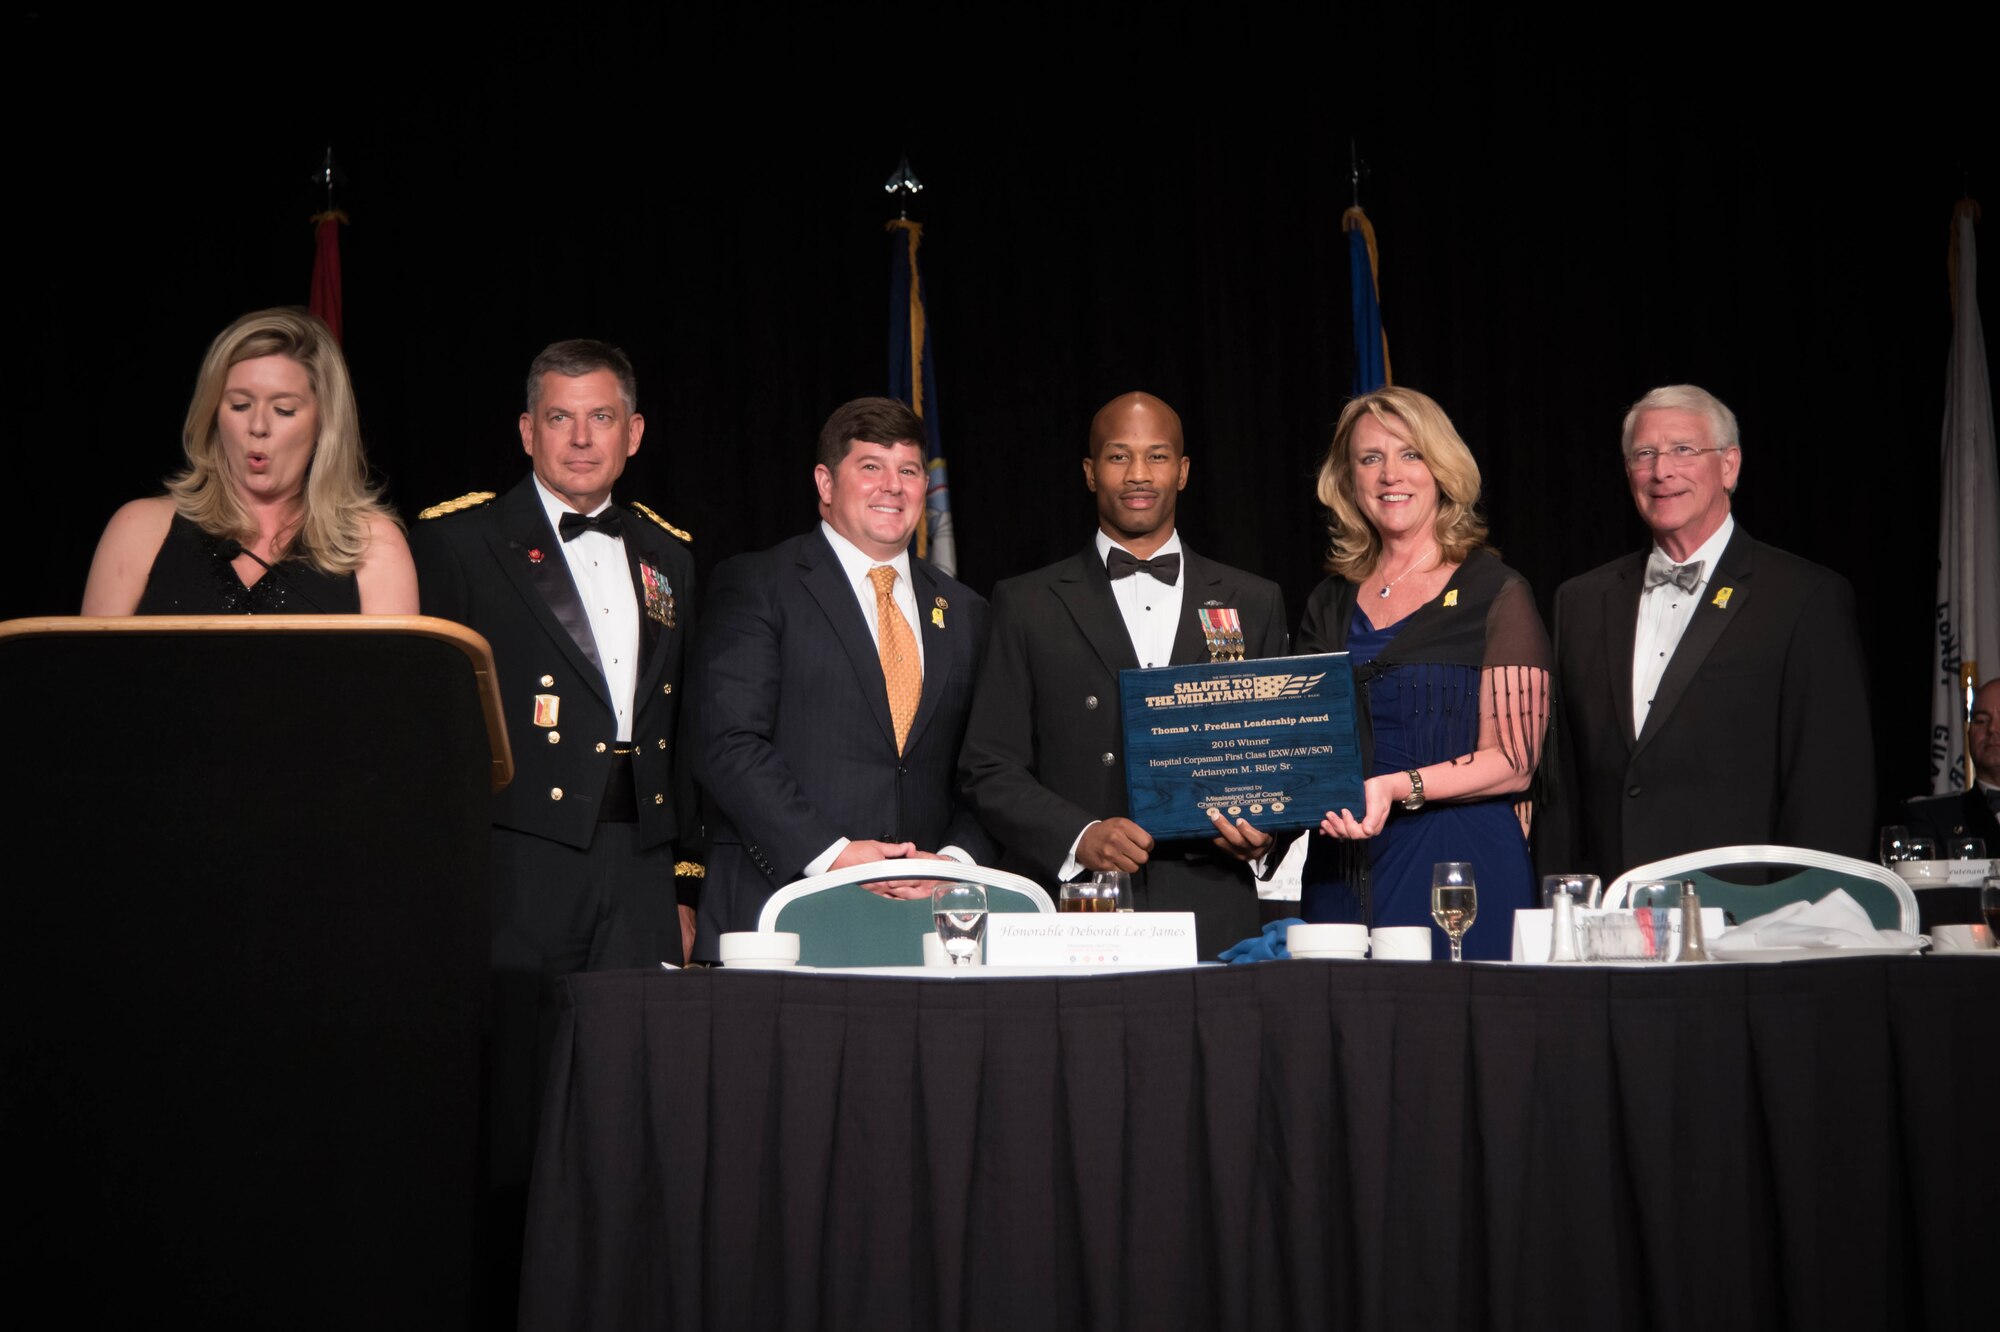 Secretary of the Air Force Deborah Lee James presents the Thomas V. Fredian Community Leadership Award to Navy Petty Officer 1st Class Adrianyon Riley  during the 38th Annual Salute to the Military event at the Gulf Coast Convention Center in Biloxi Miss. Oct. 25. (U.S. Air Force photo/Senior Airman Heather Heiney)